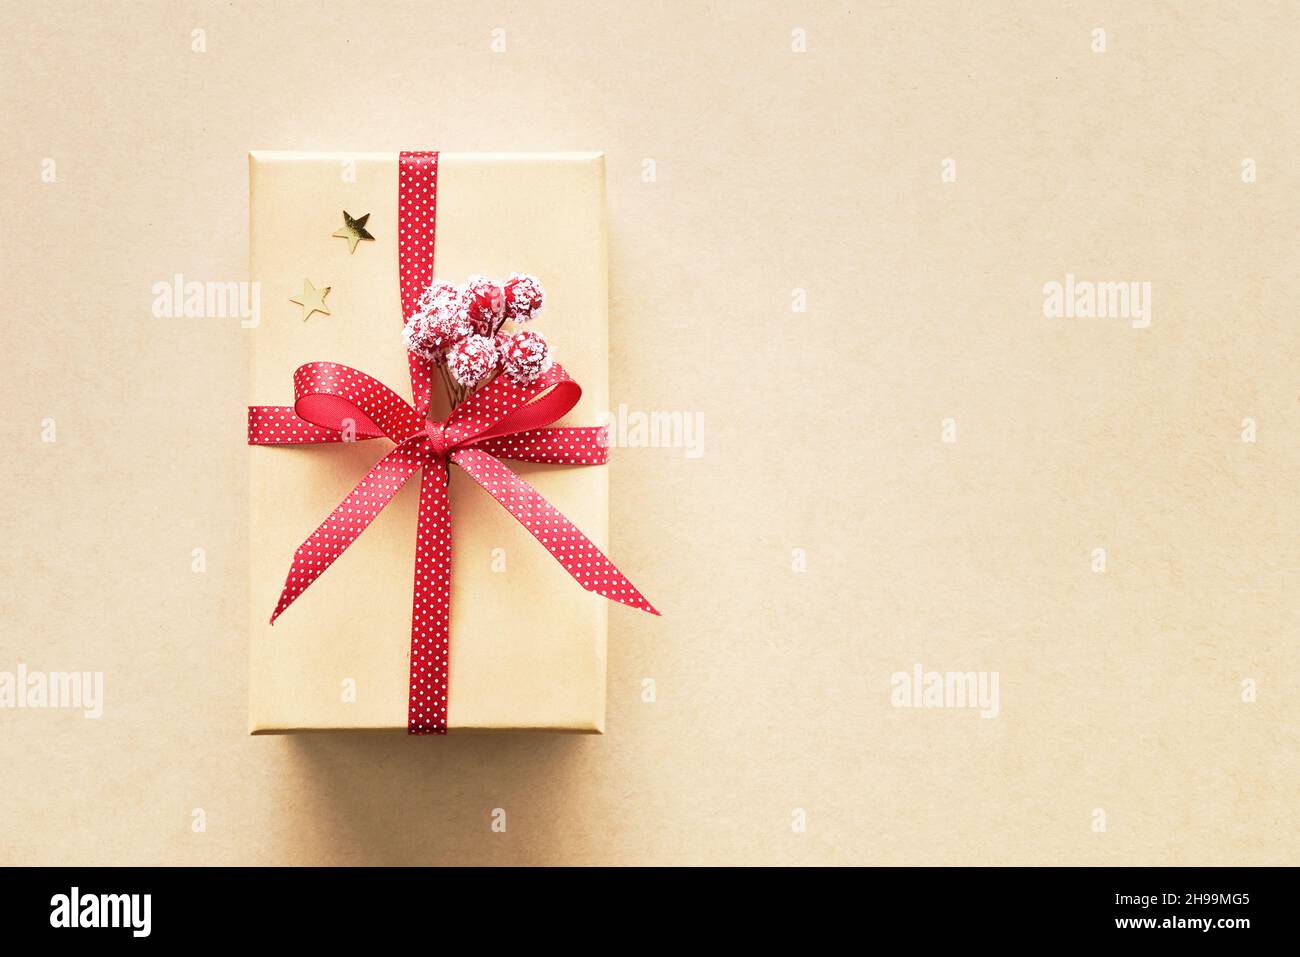 Christmas gift box with decoration on a craft paper background. Top view, copy space for text Stock Photo